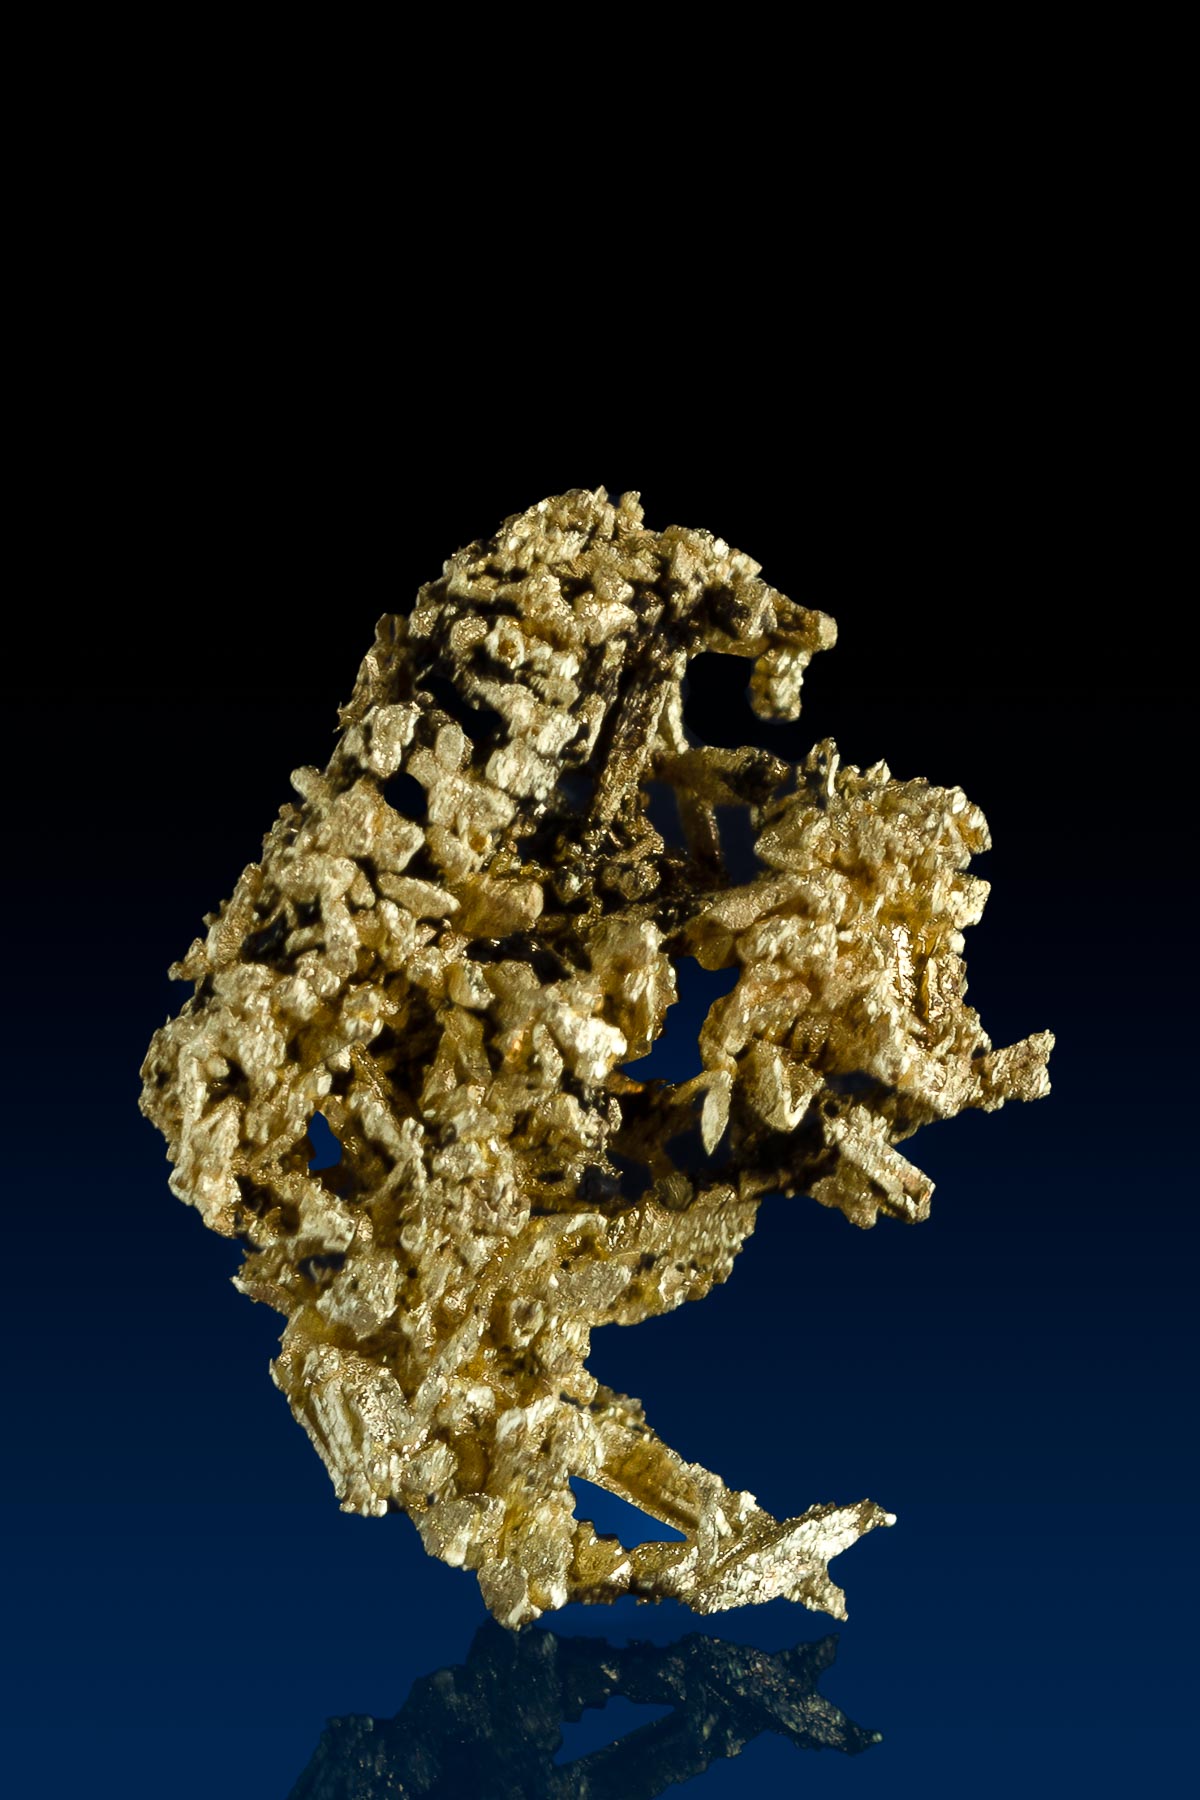 Intriguing and Brilliant Gold Crystal Specimen from CO